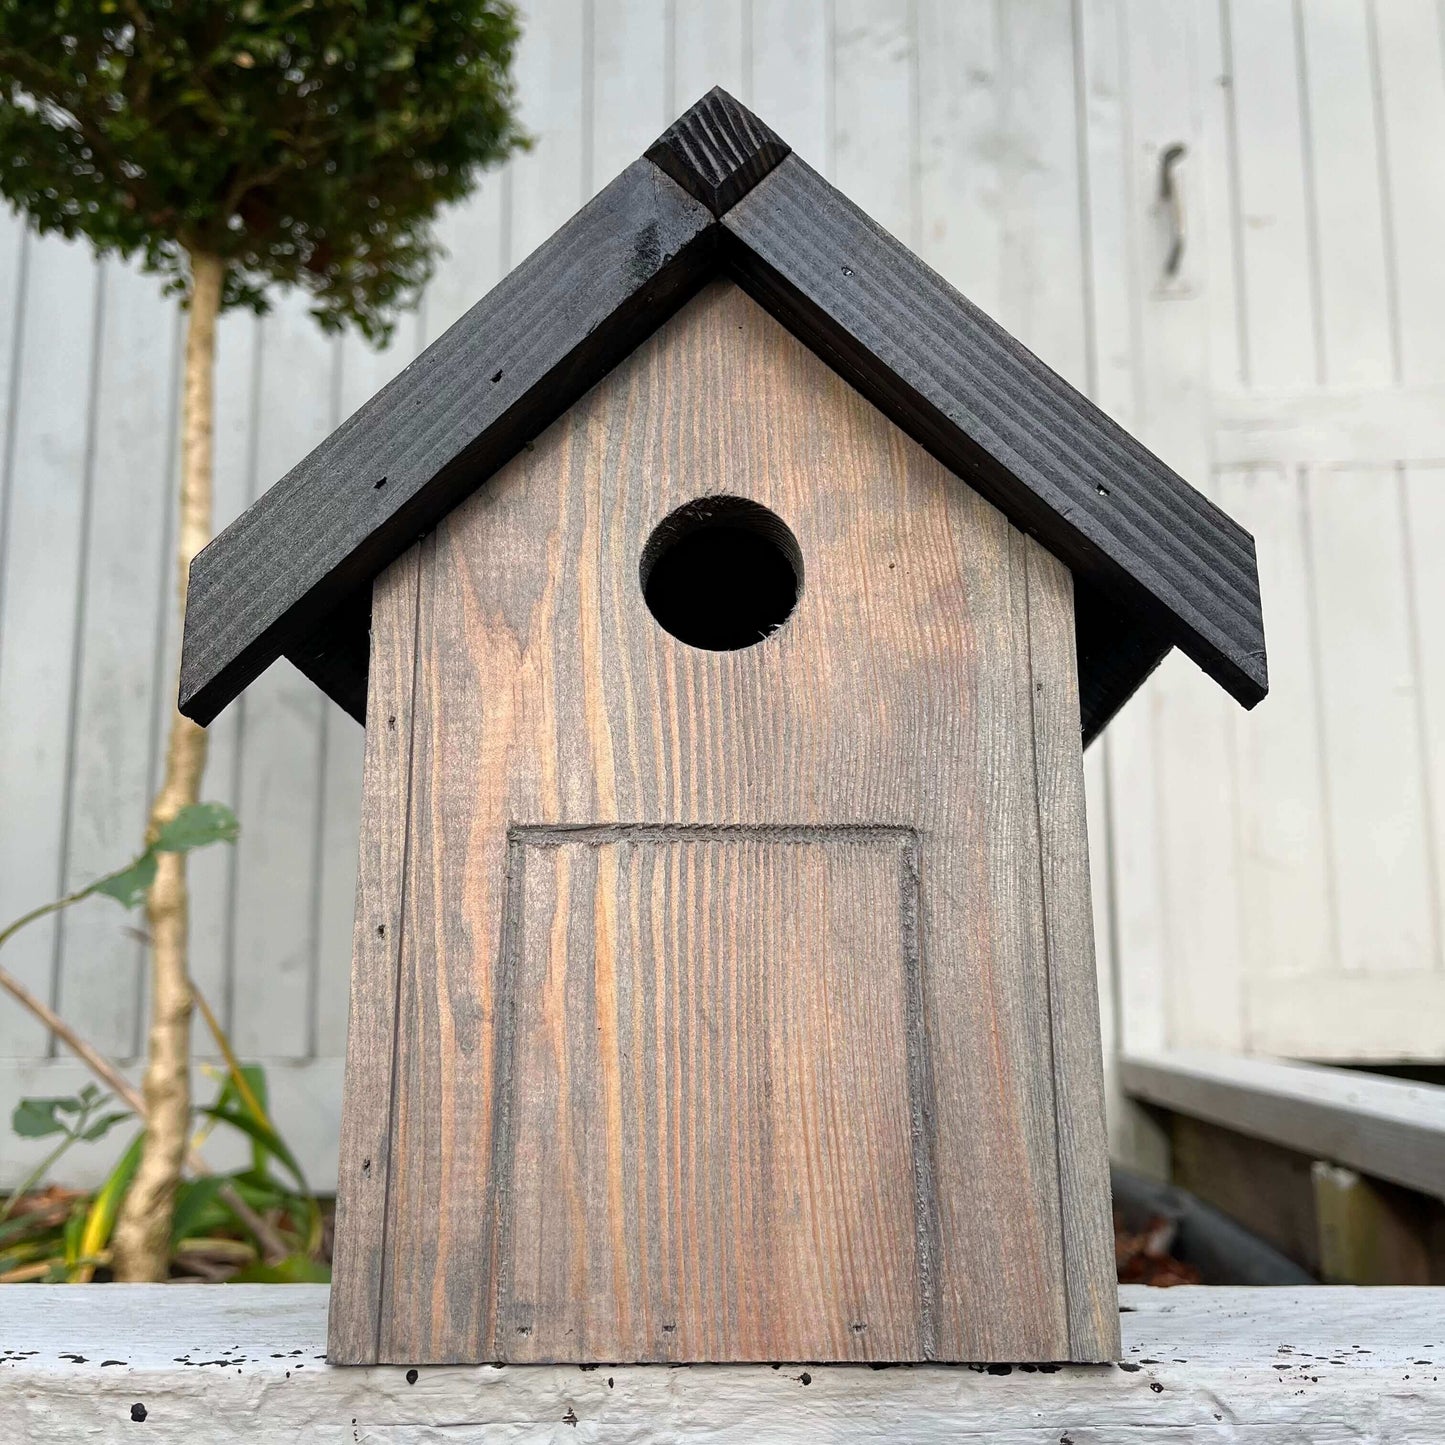 Sturdy wooden nest box, available from Haith's.